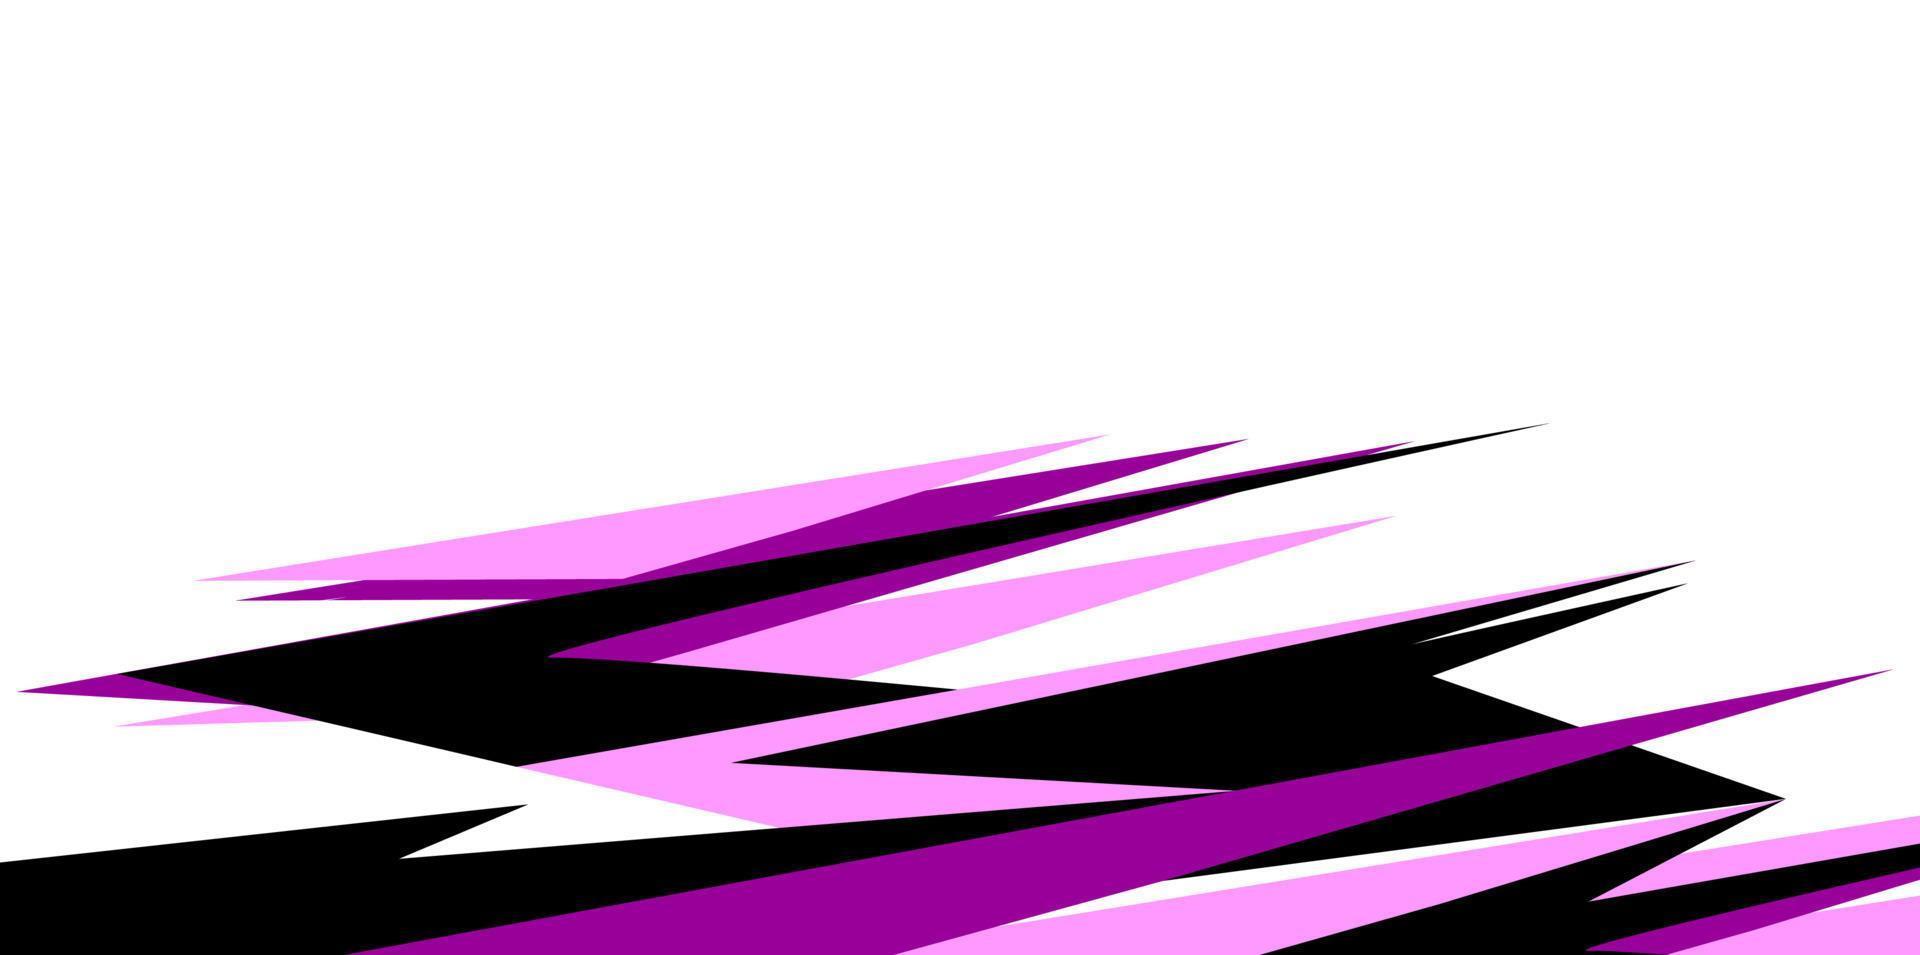 racing stripes purple abstract decals background vector